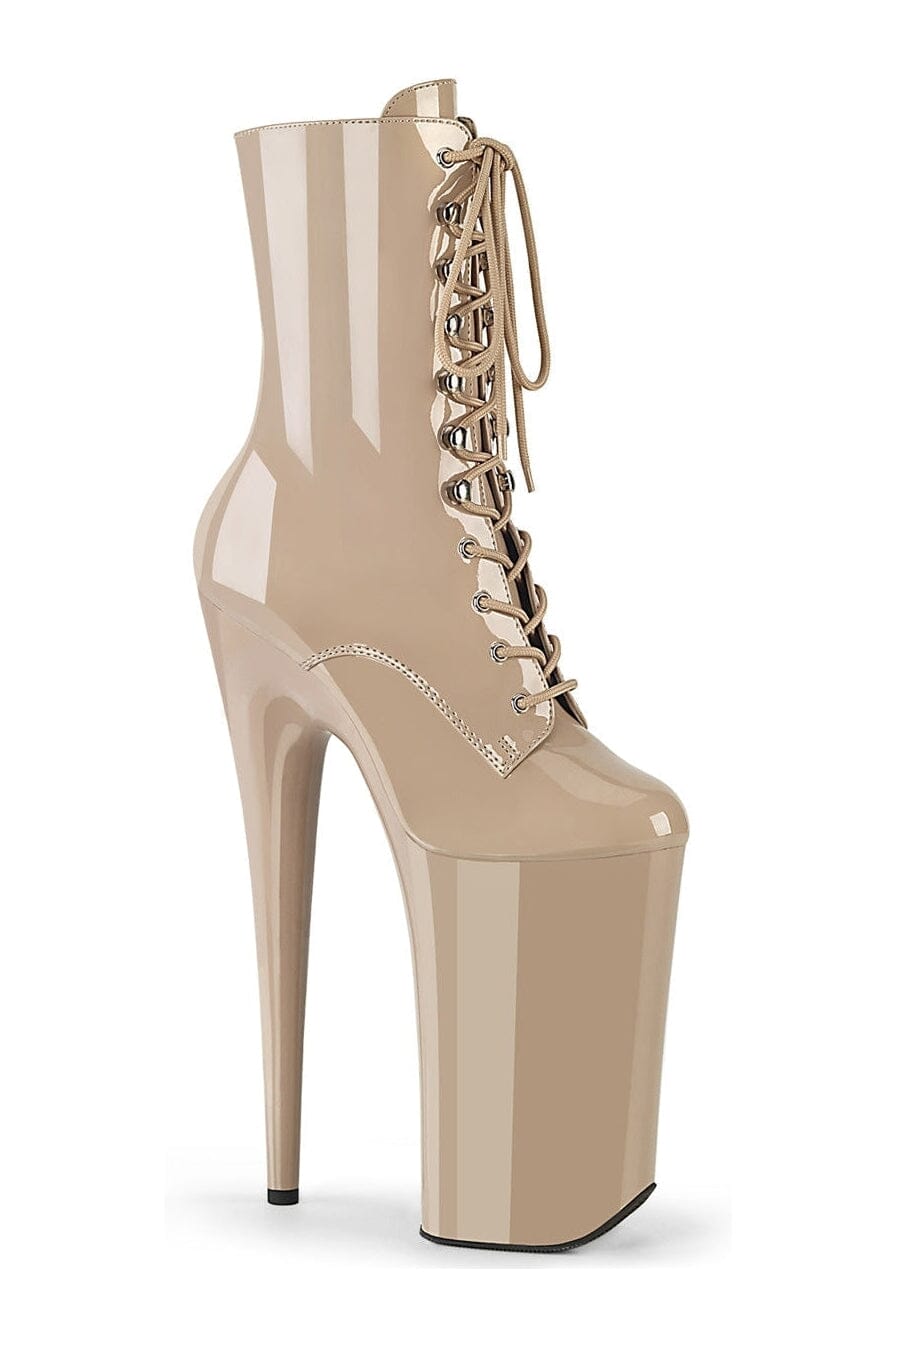 BEYOND-1020 Nude Patent Ankle Boot-Ankle Boots- Stripper Shoes at SEXYSHOES.COM